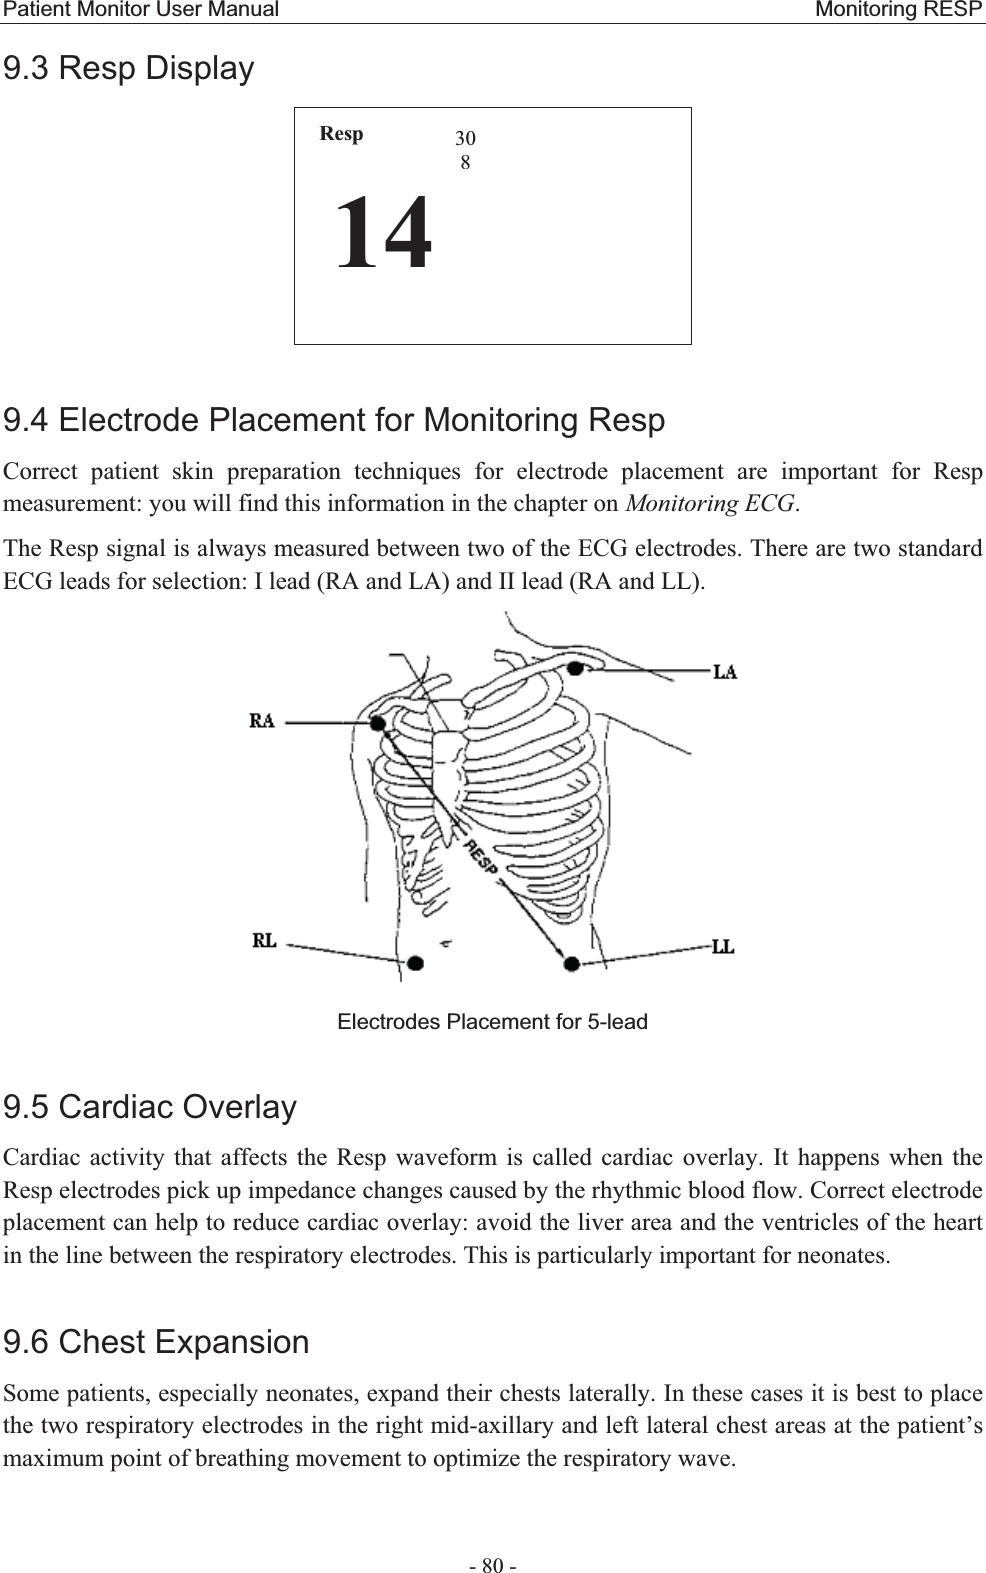 Patient Monitor User Manual                                                 Monitoring RESP  - 80 - 9.3 Resp Display Resp143089.4 Electrode Placement for Monitoring RespCorrect patient skin preparation techniques for electrode placement are important for Resp measurement: you will find this information in the chapter on Monitoring ECG. The Resp signal is always measured between two of the ECG electrodes. There are two standard ECG leads for selection: I lead (RA and LA) and II lead (RA and LL).    Electrodes Placement for 5-lead 9.5 Cardiac OverlayCardiac activity that affects the Resp waveform is called cardiac overlay. It happens when the Resp electrodes pick up impedance changes caused by the rhythmic blood flow. Correct electrode placement can help to reduce cardiac overlay: avoid the liver area and the ventricles of the heart in the line between the respiratory electrodes. This is particularly important for neonates. 9.6 Chest ExpansionSome patients, especially neonates, expand their chests laterally. In these cases it is best to place the two respiratory electrodes in the right mid-axillary and left lateral chest areas at the patient’s maximum point of breathing movement to optimize the respiratory wave. 